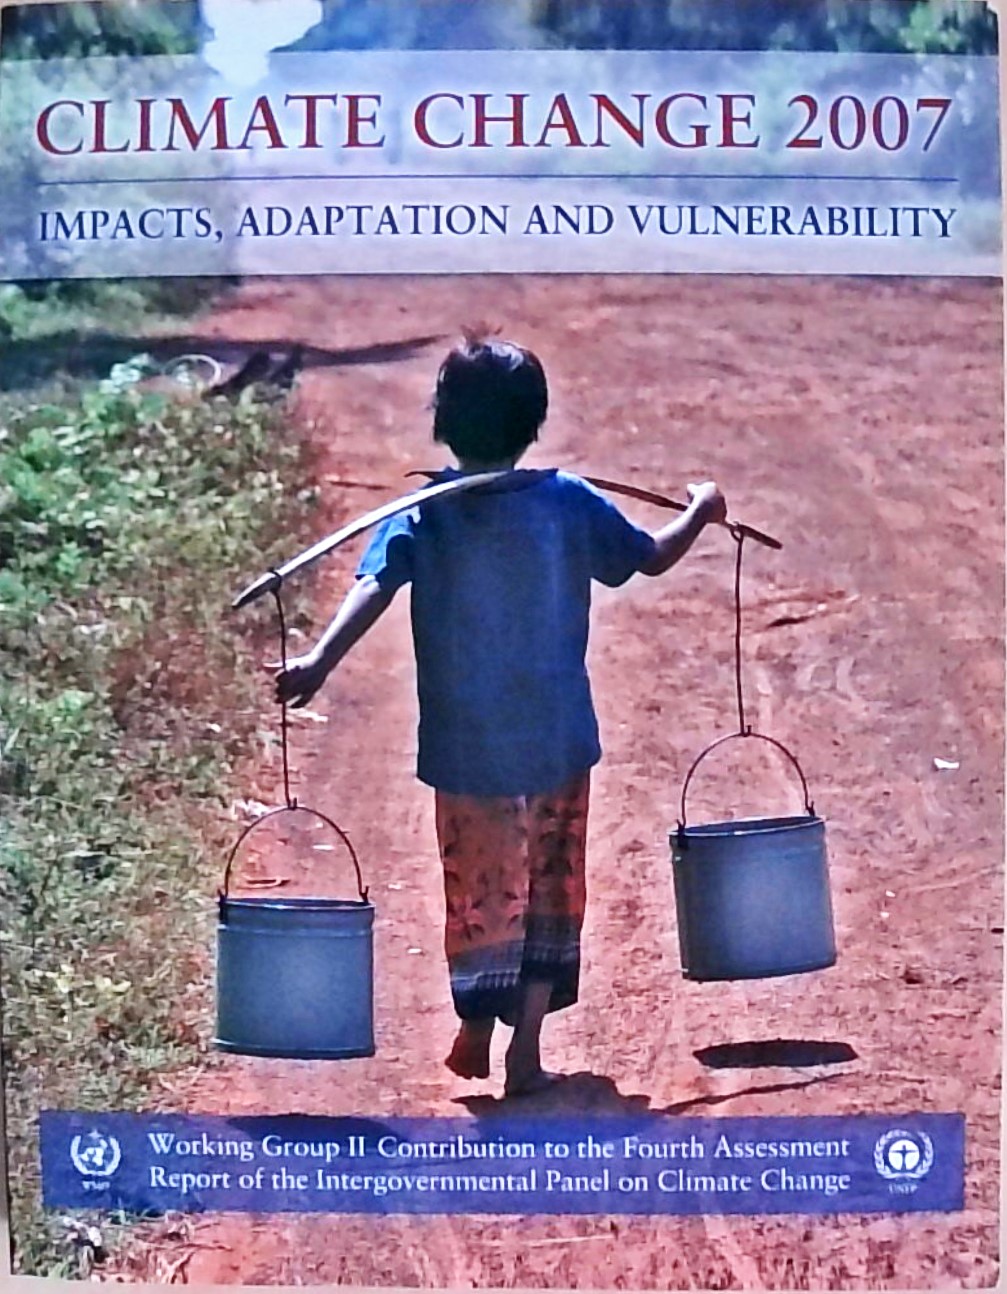 Climate Change 2007 - Impacts, Adaptation and Vulnerability: Working Group II contribution to the Fourth Assessment Report of the IPCC - Intergovernmental, Panel on Climate Change